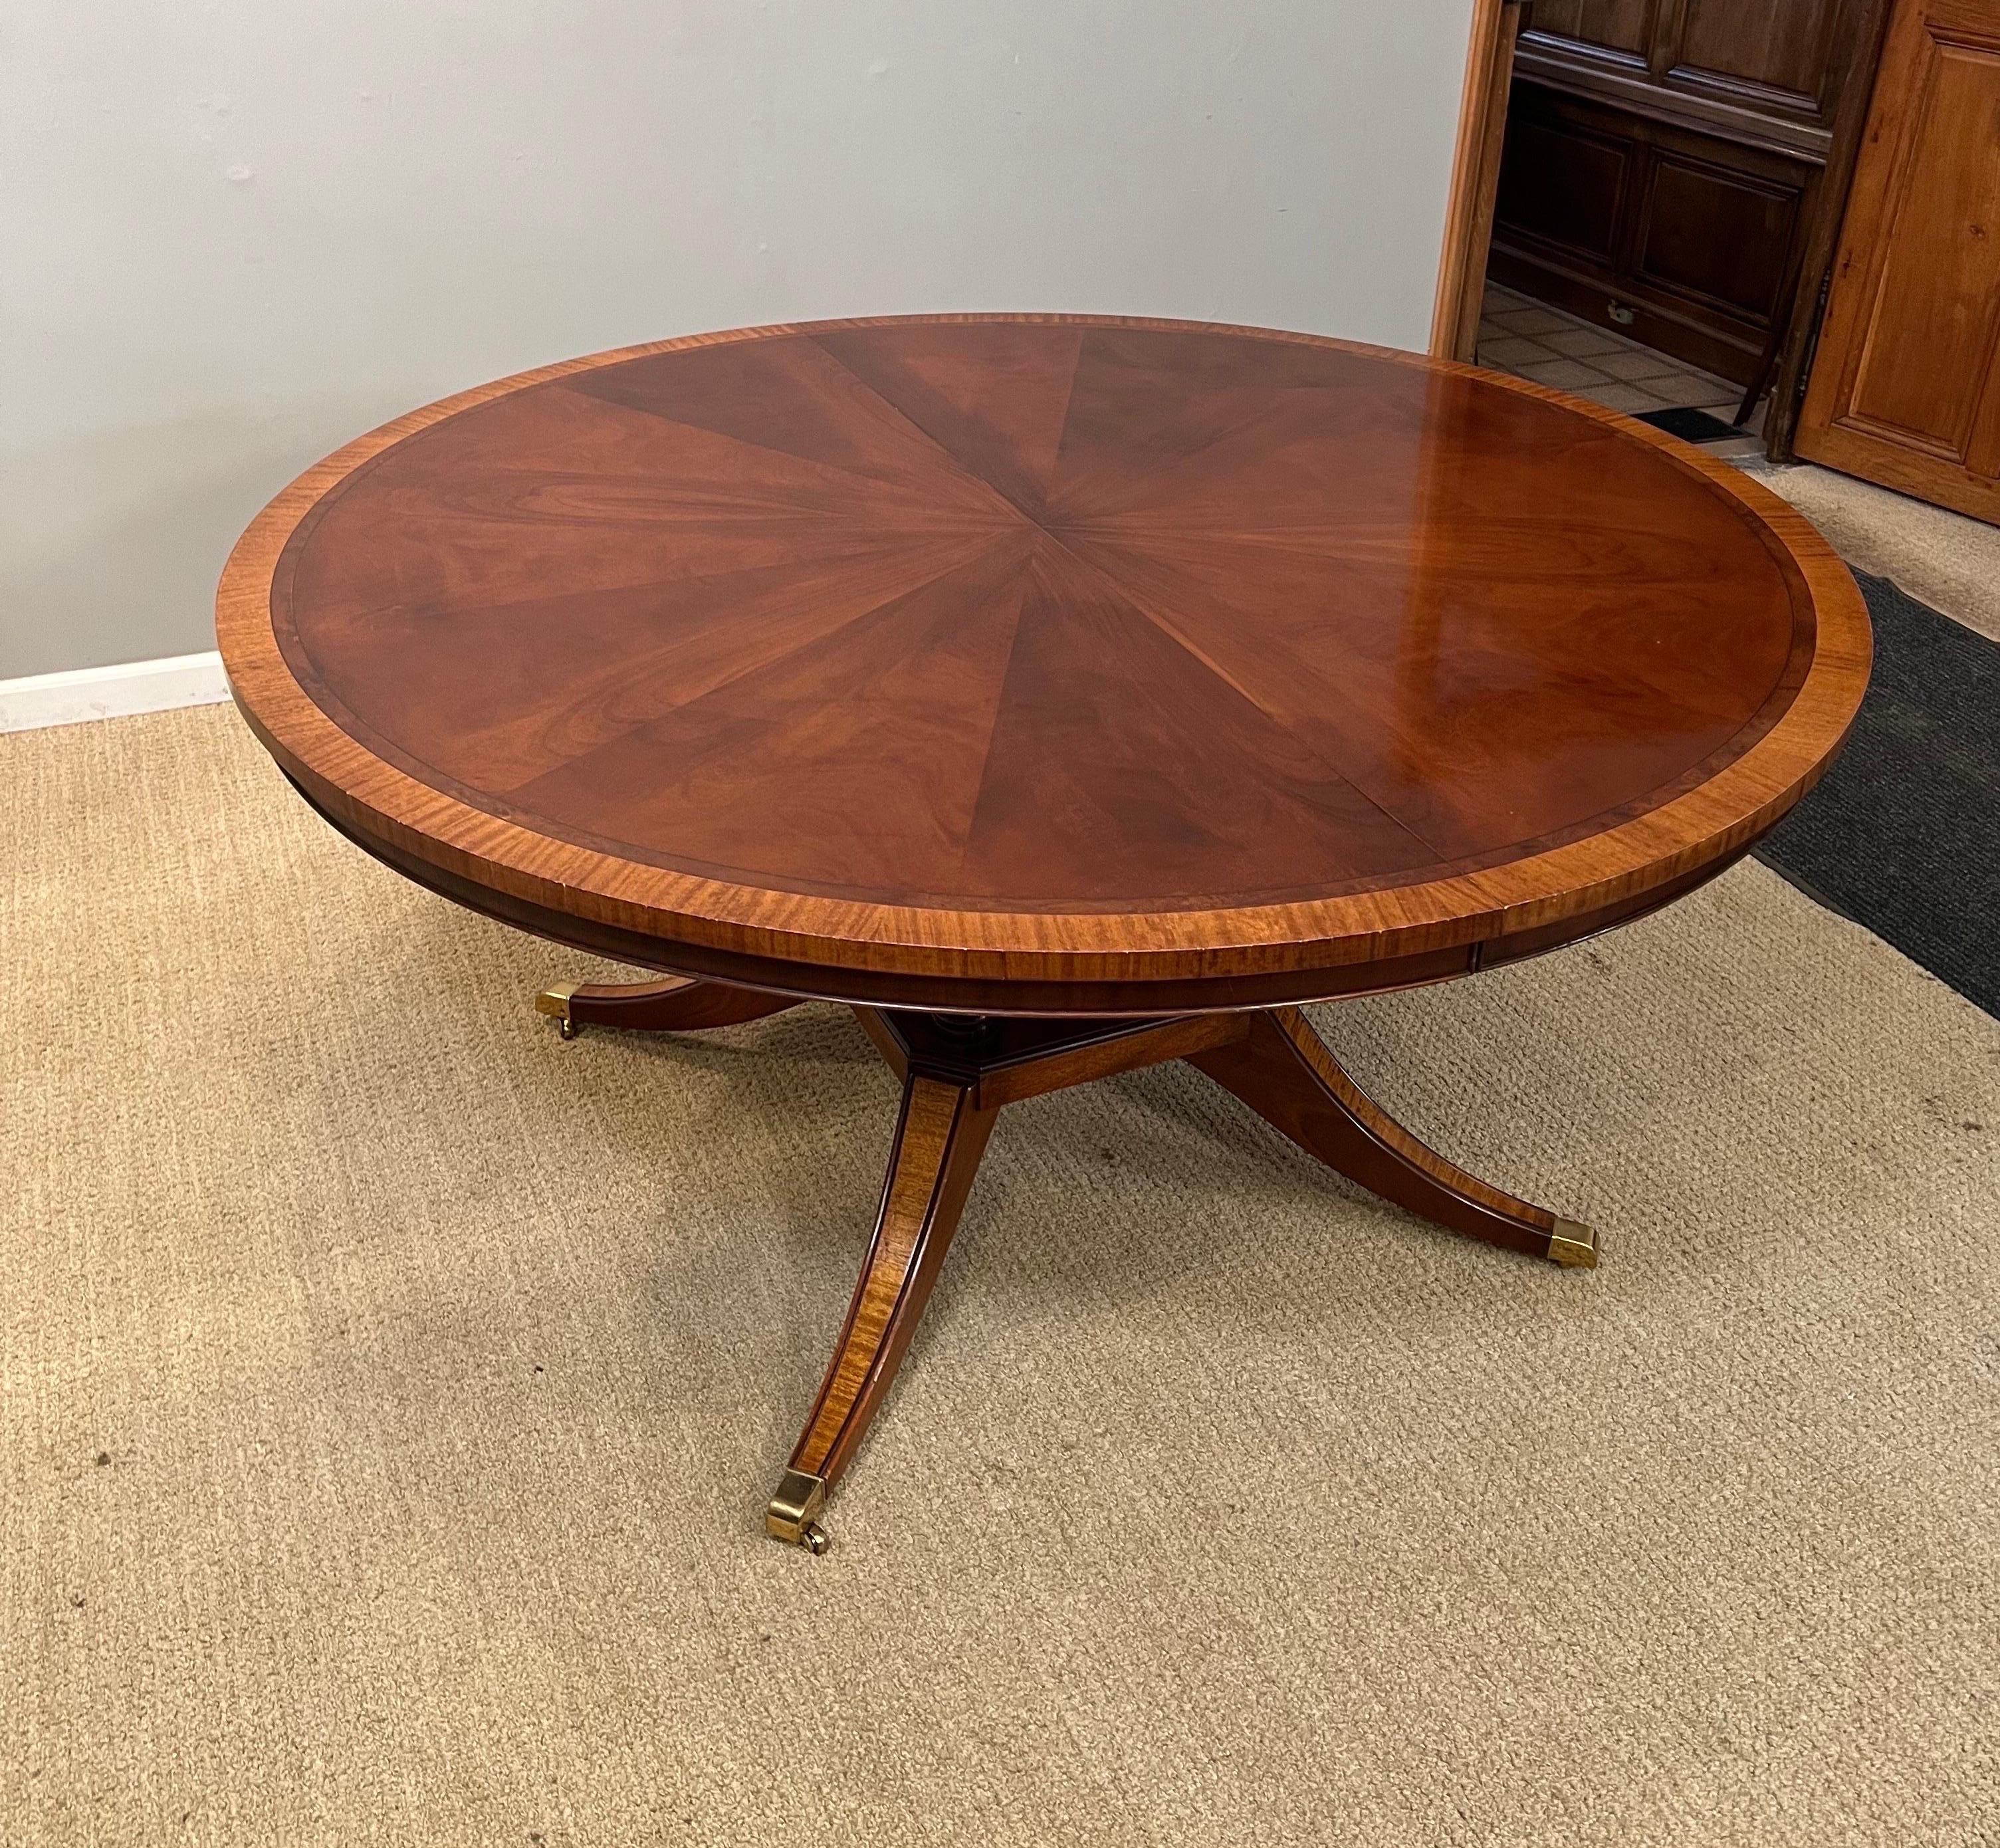 George III Mahogany & Cross-Banded Single Pedestal Extension, Dining Table with Two Leaves